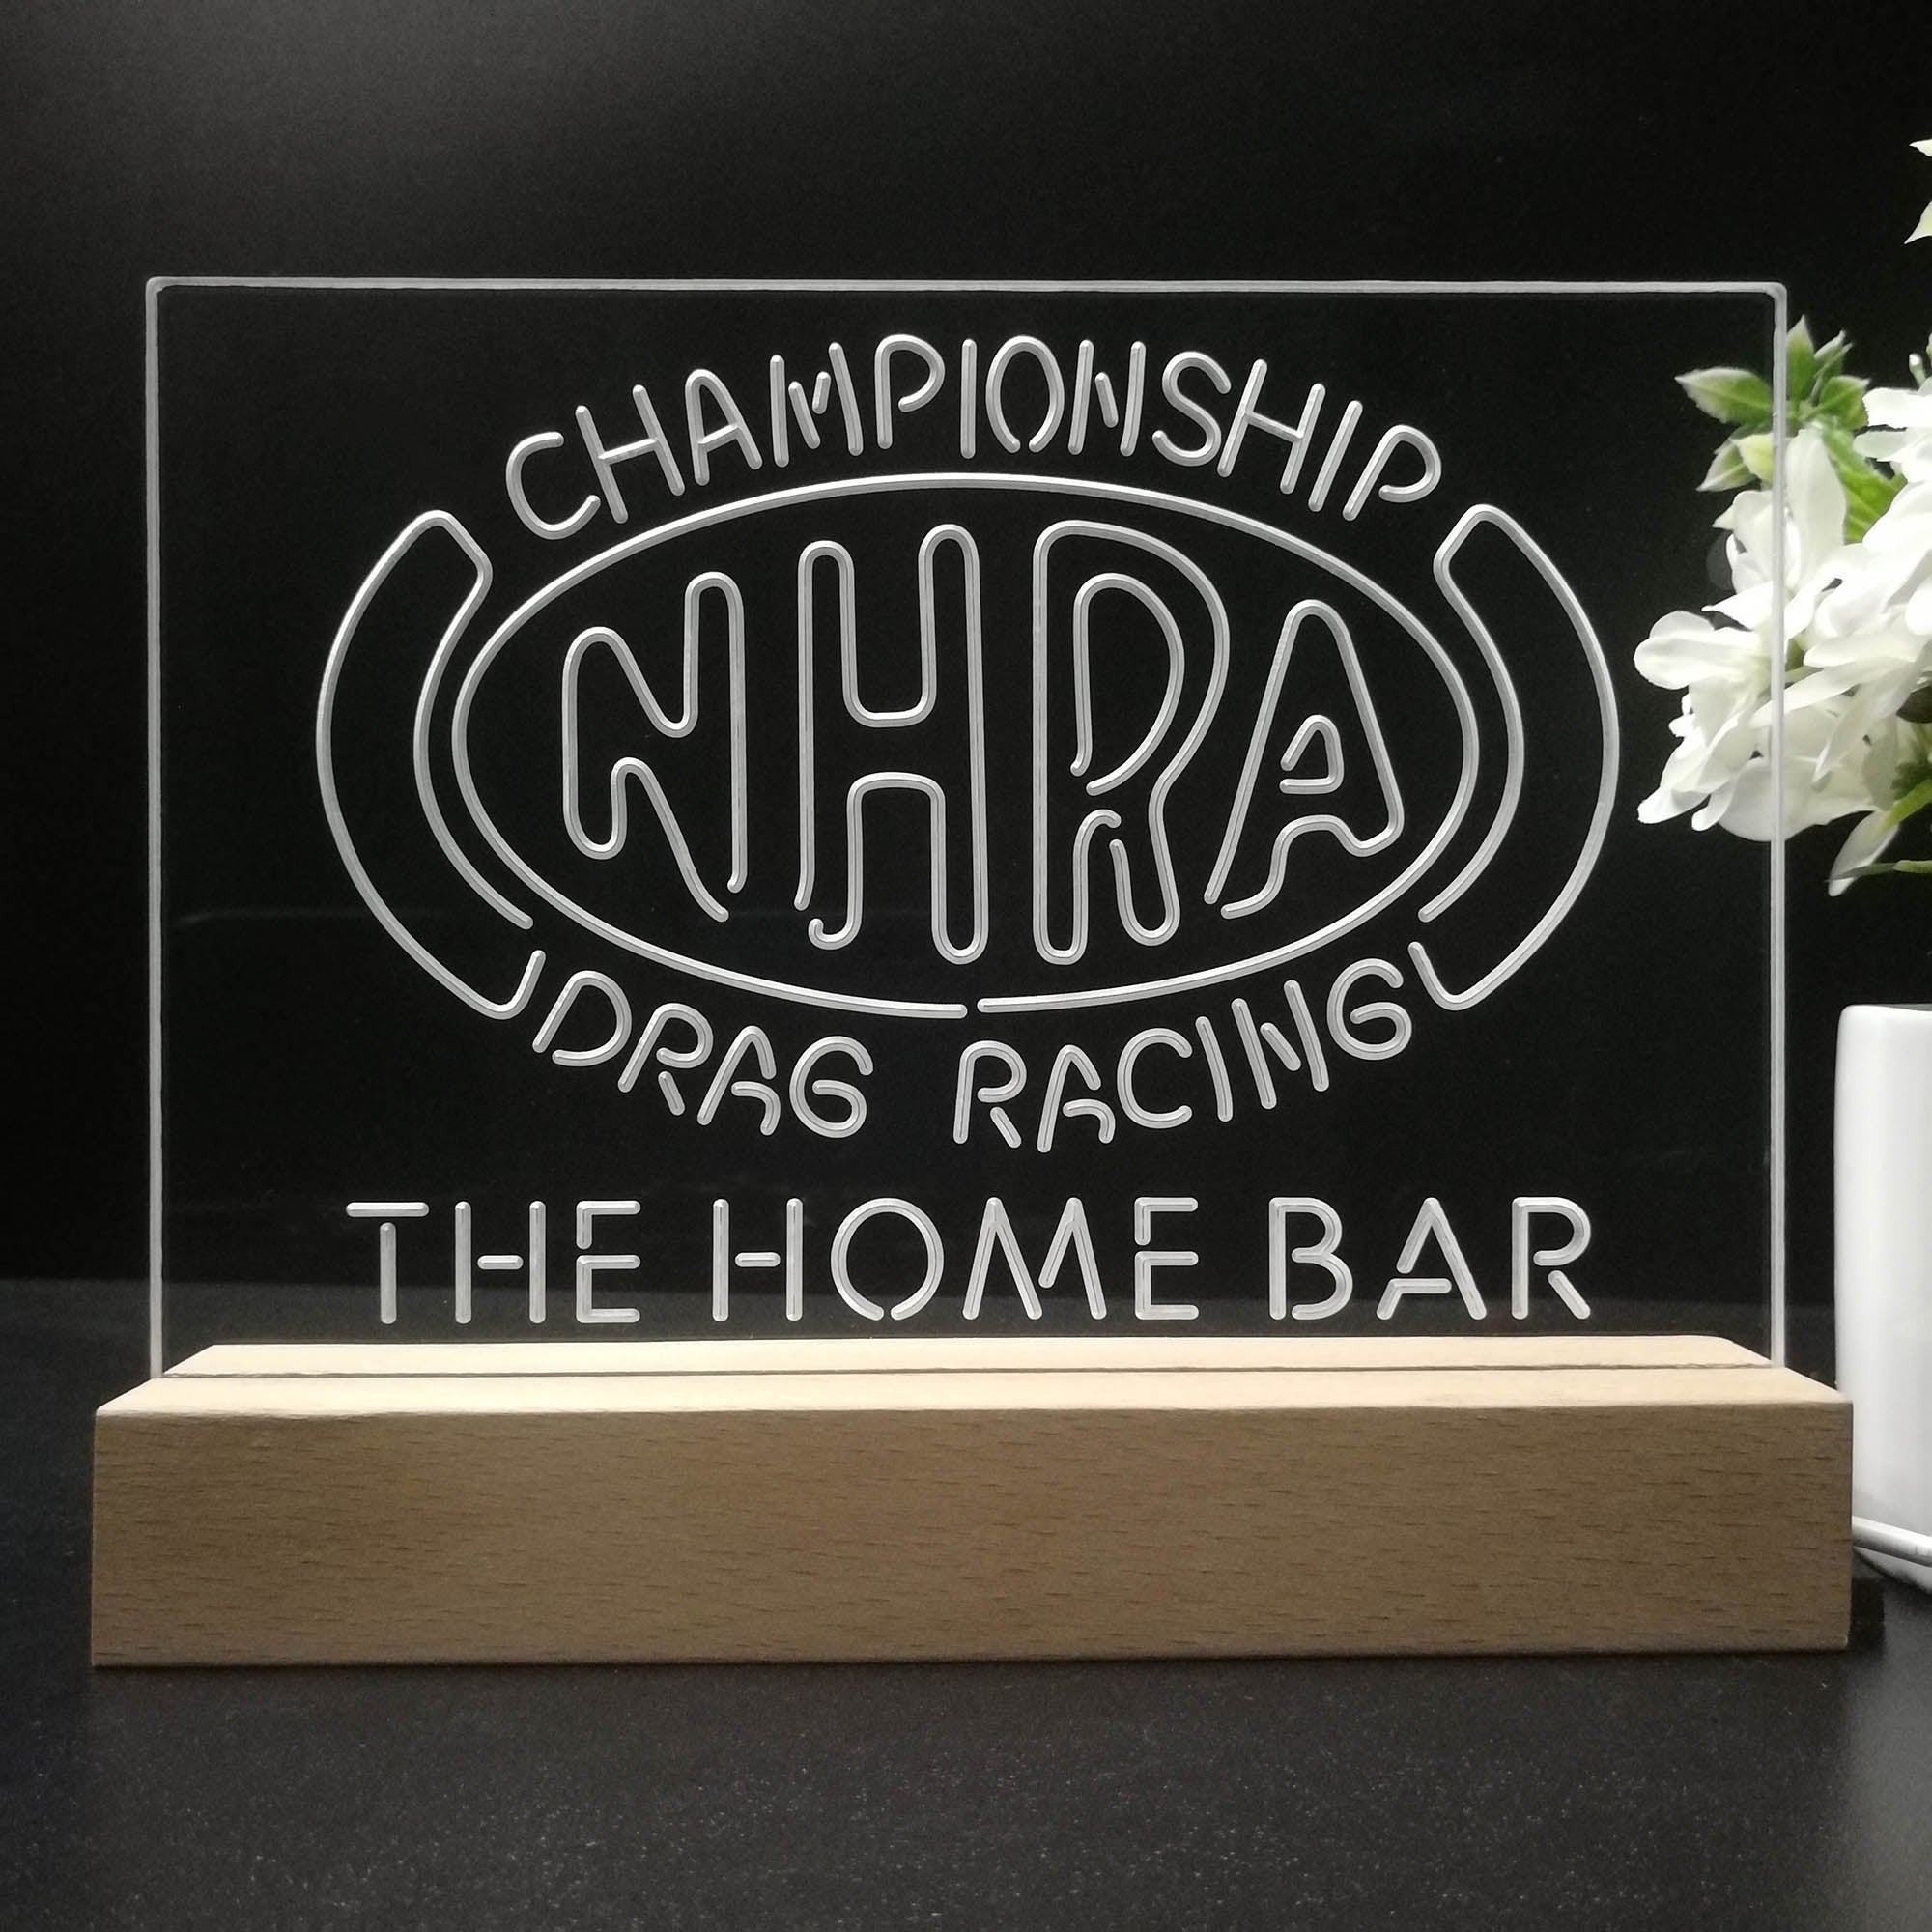 Personalized NHRA,Drags Racing Souvenir Neon LED Night Light Sign